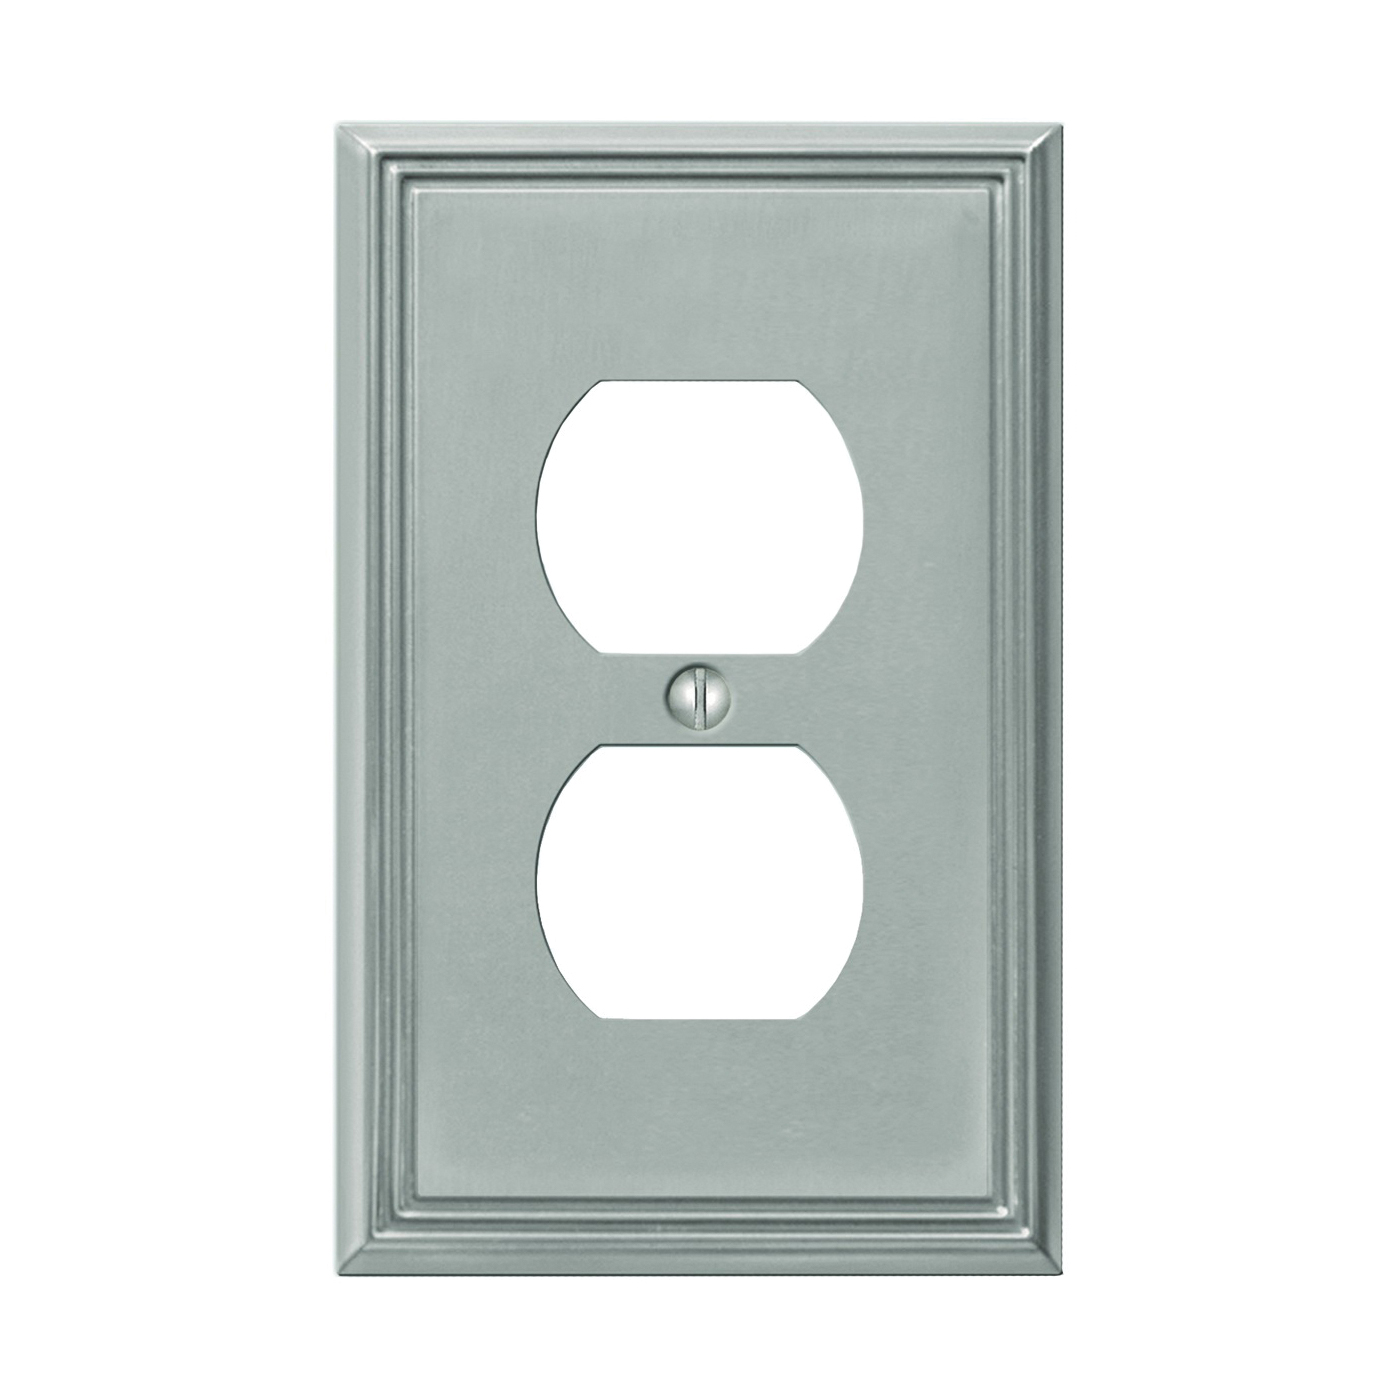 Metro Line 77DBN Outlet Wallplate, 4-7/8 in L, 3 in W, 1 -Gang, Metal, Brushed Nickel, Wall Mounting